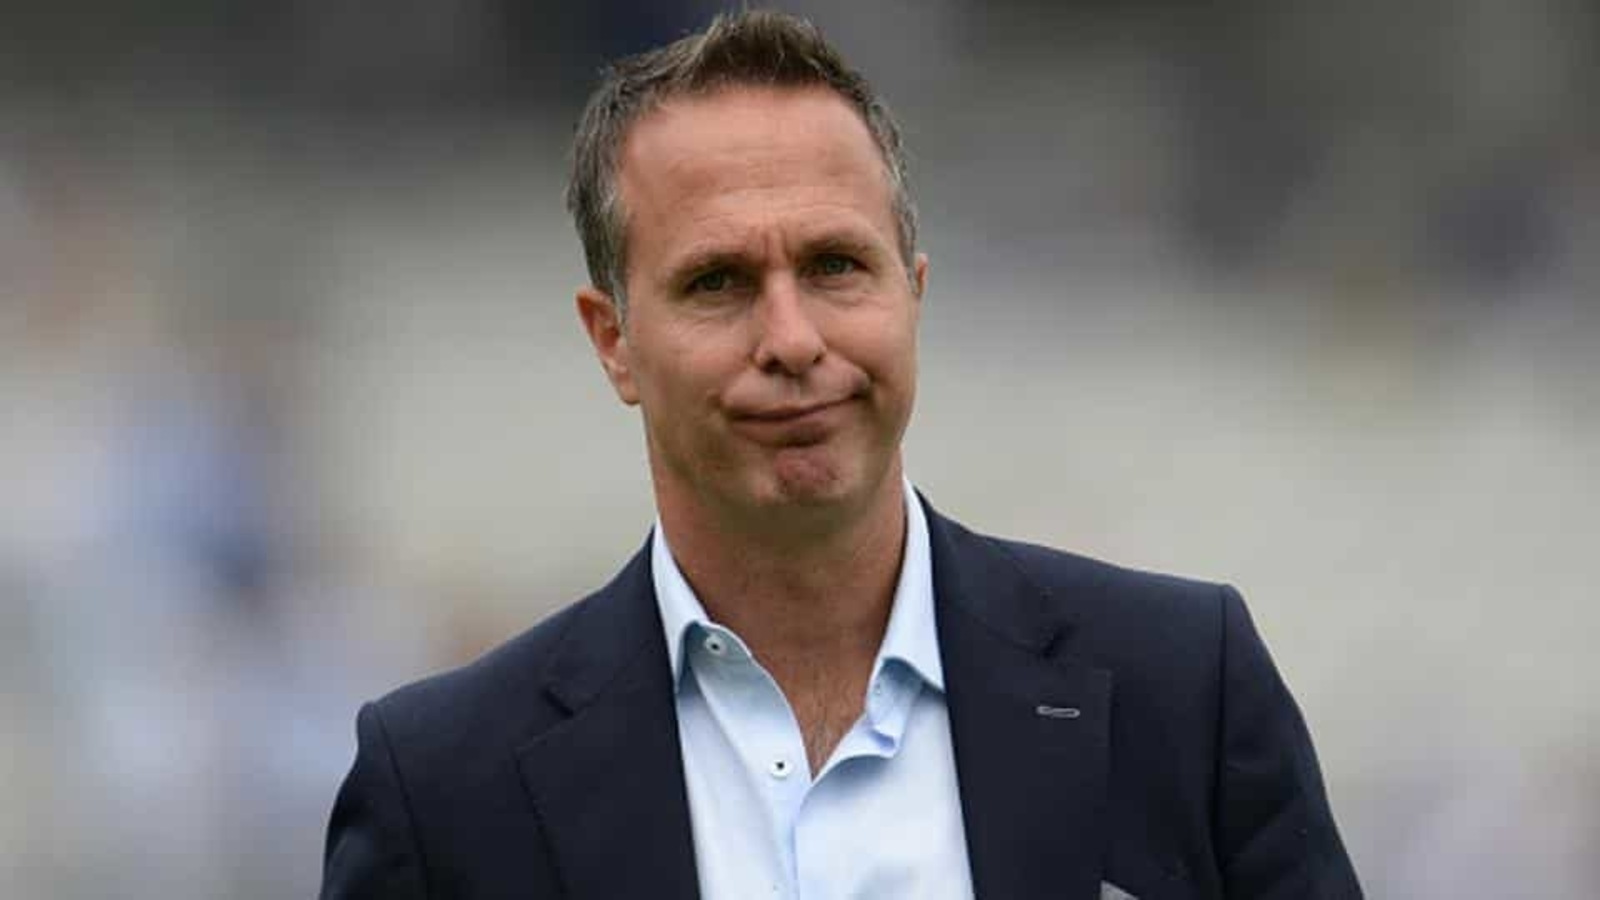 Michael Vaughan : Michael Vaughan Trolled For His Premature Icc T20 World Cup Prediction After Virat Kohli Led India Win Series India Vs England 5th T20i Ind V Eng : Third man cricket 🏏 🟢 @thirdmancrickuk.